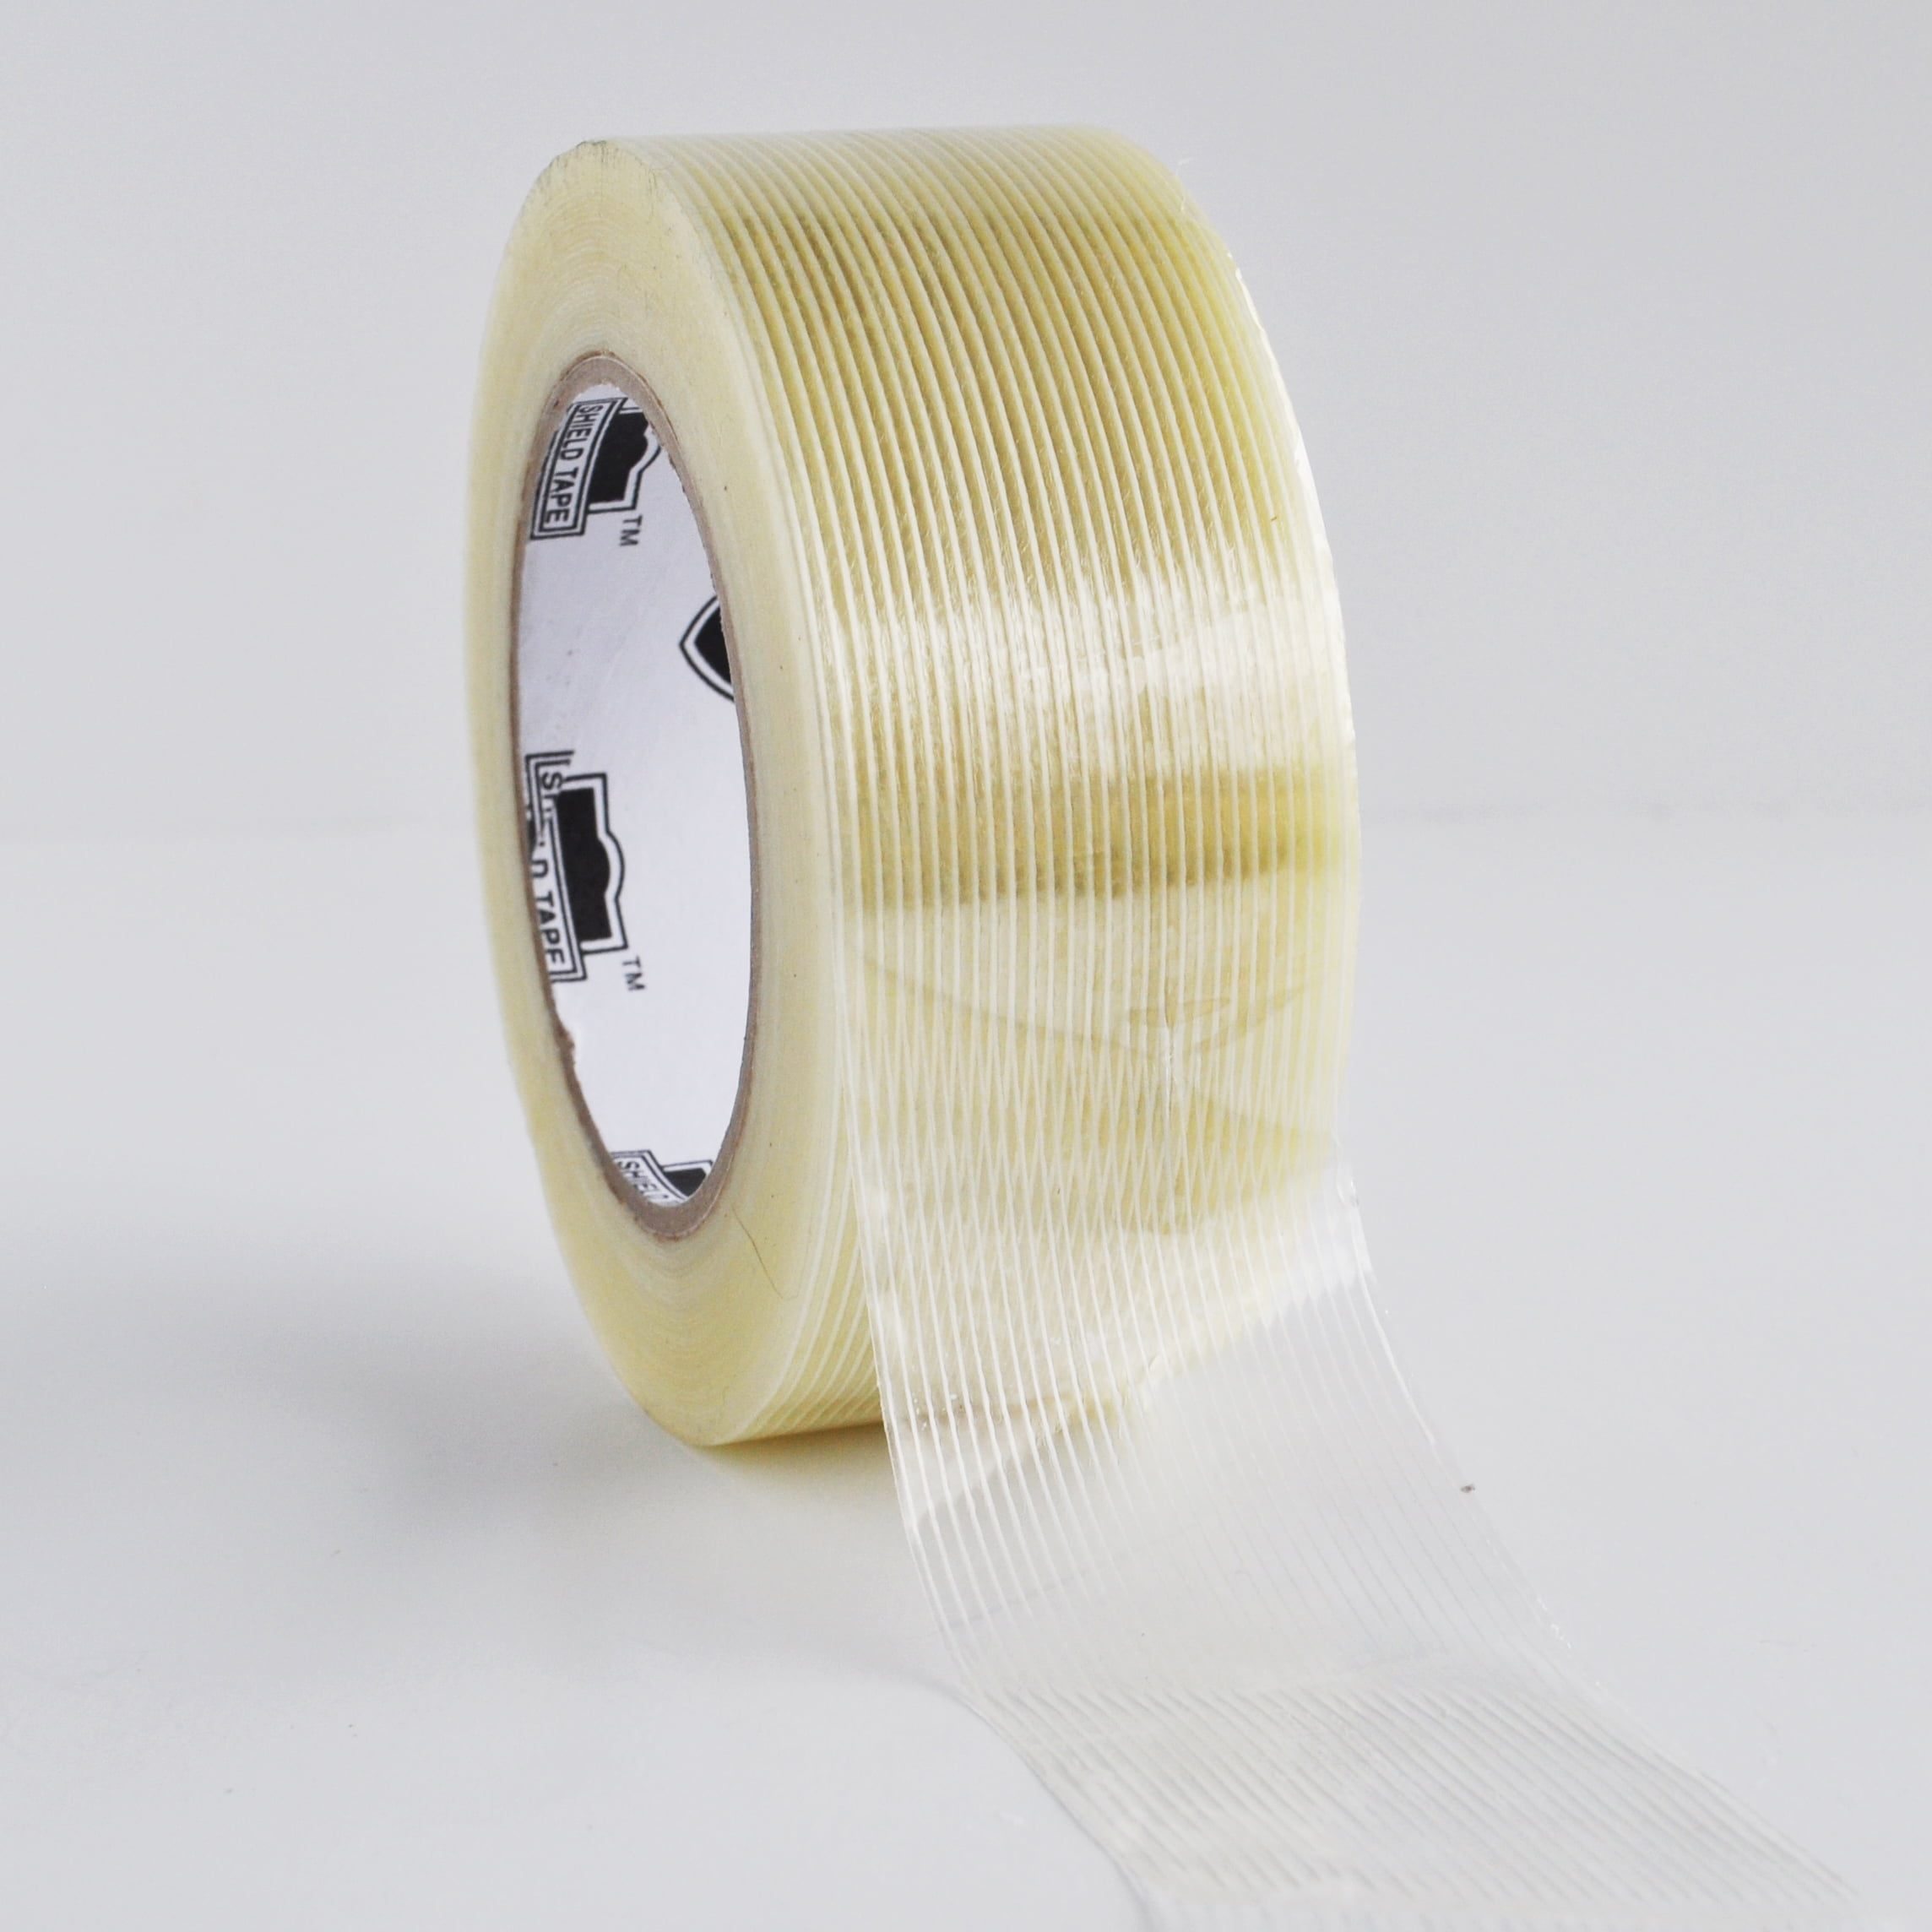 Packing Tape Clear 4 Rolls 1" x 60 YDS Fiberglass Reinforced Filament Strapping 